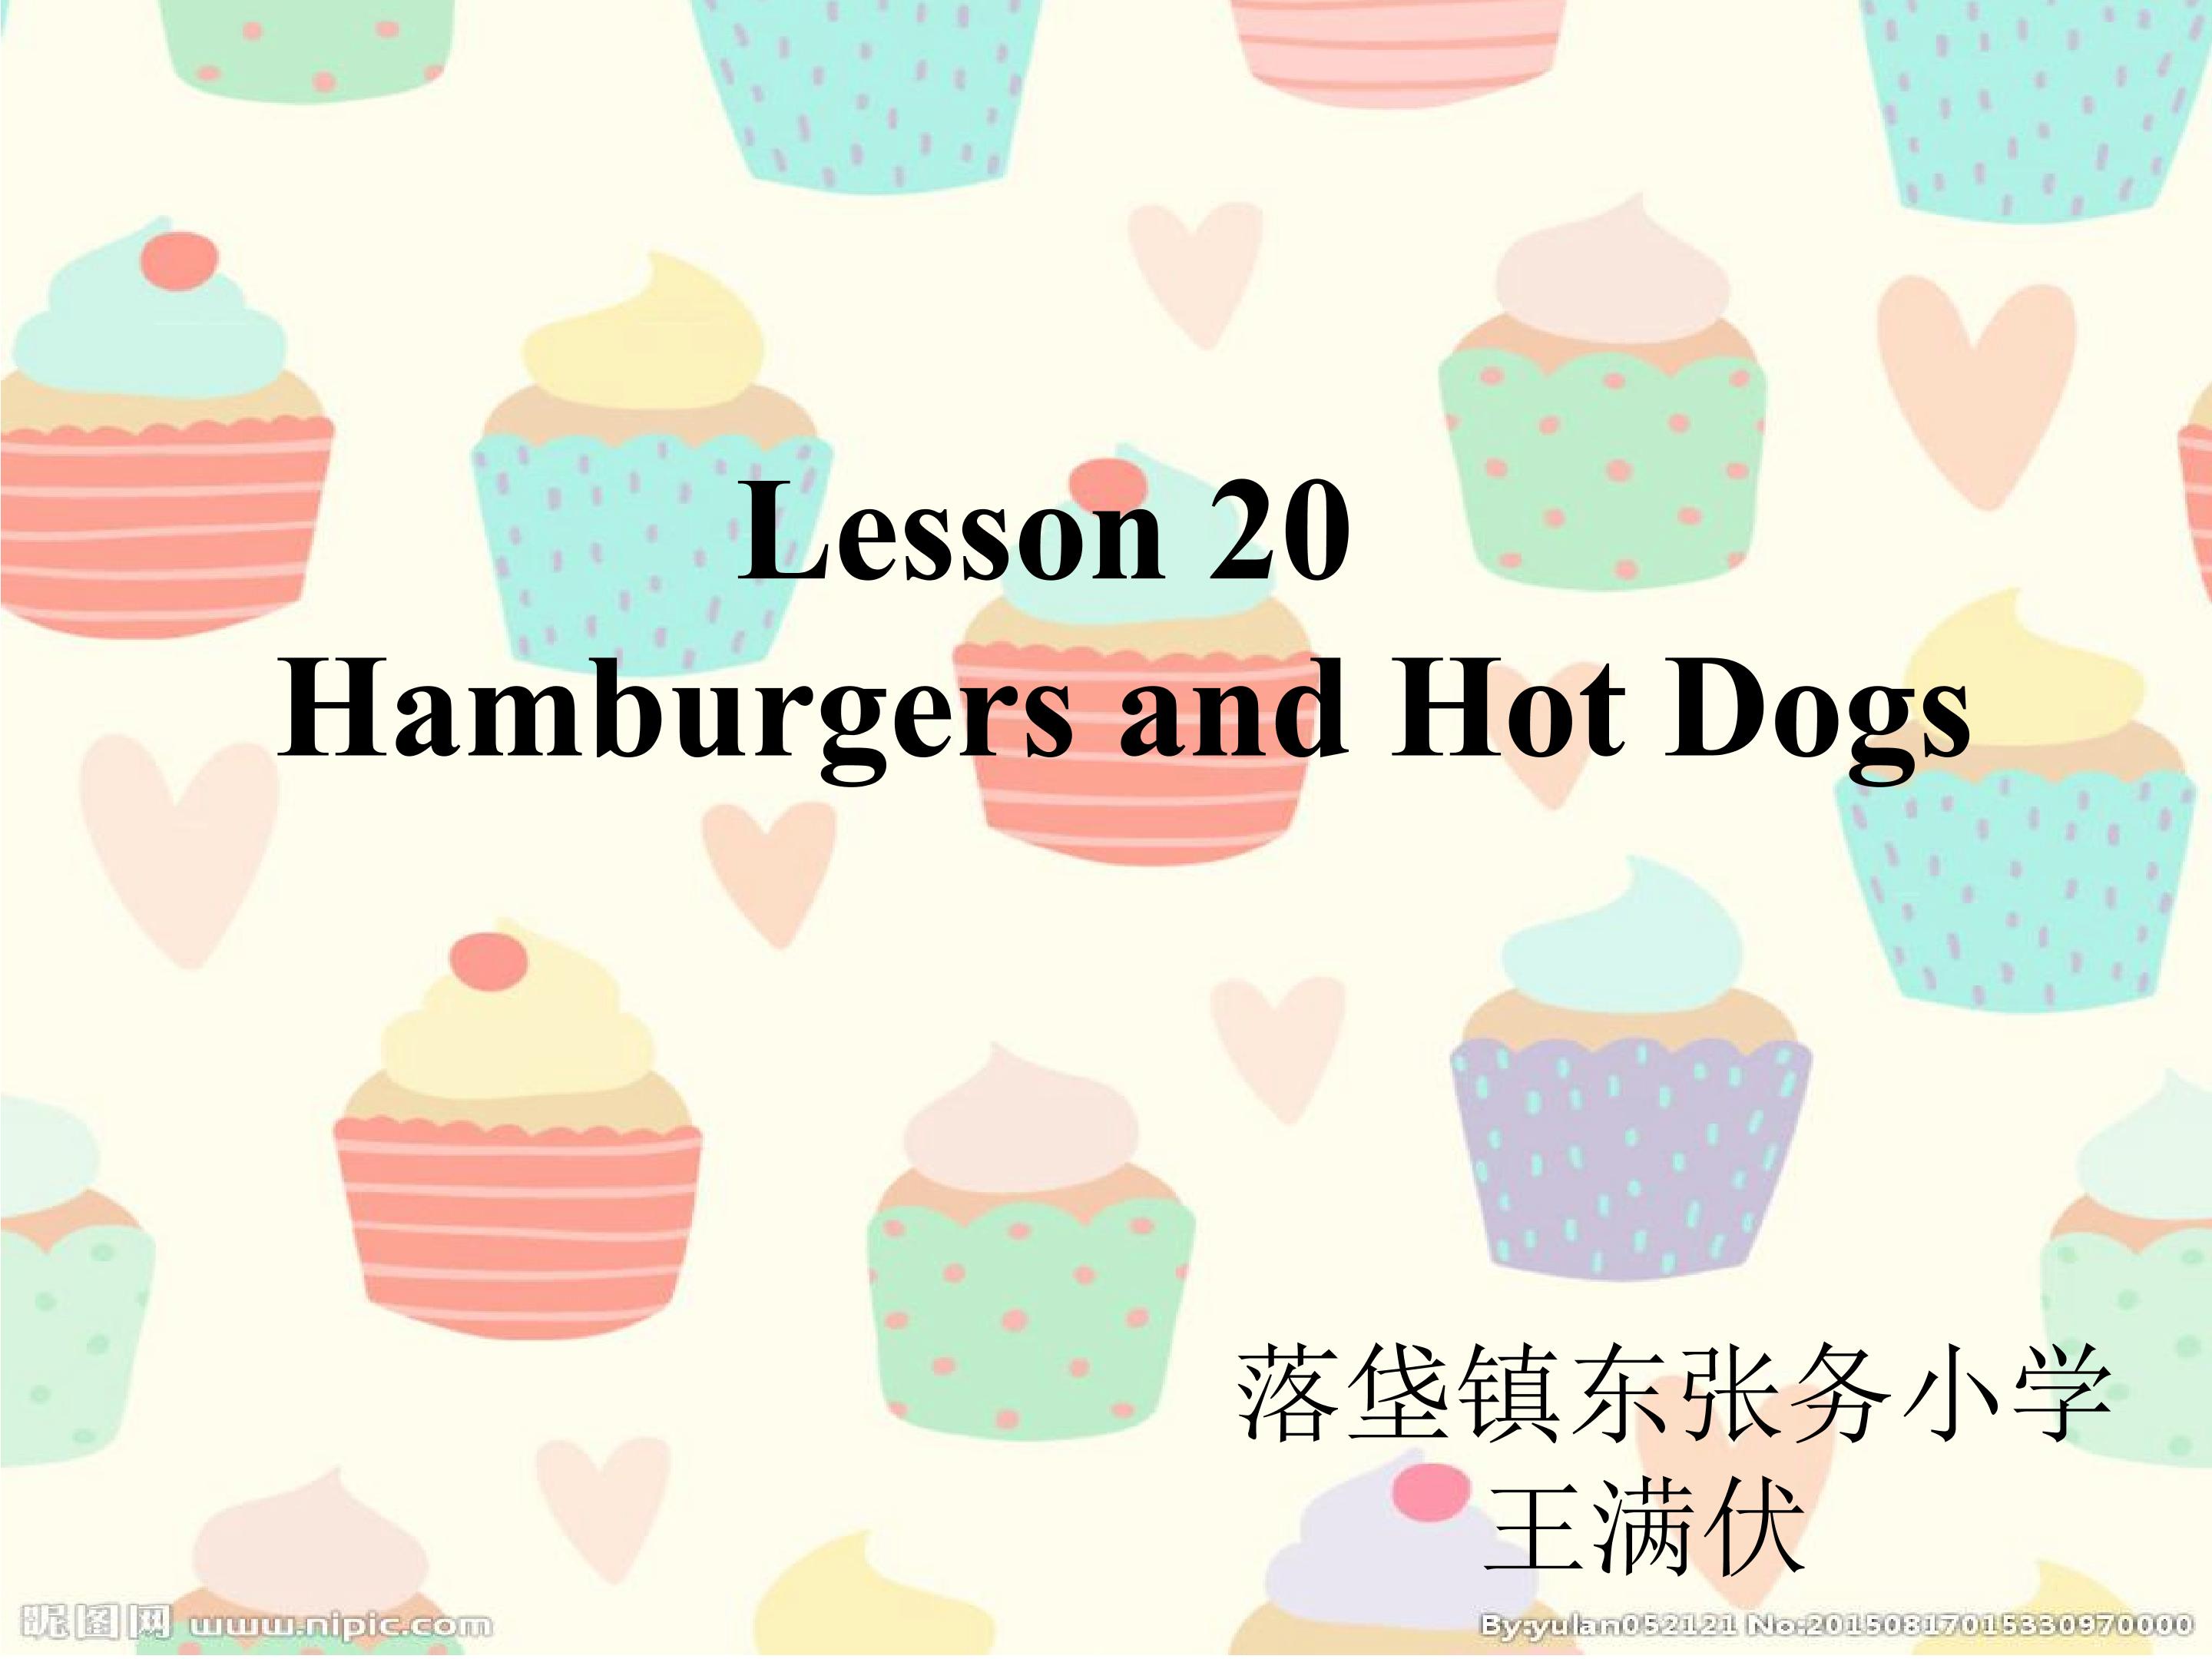 Lesson 20 Hamburgers and Hot Dogs